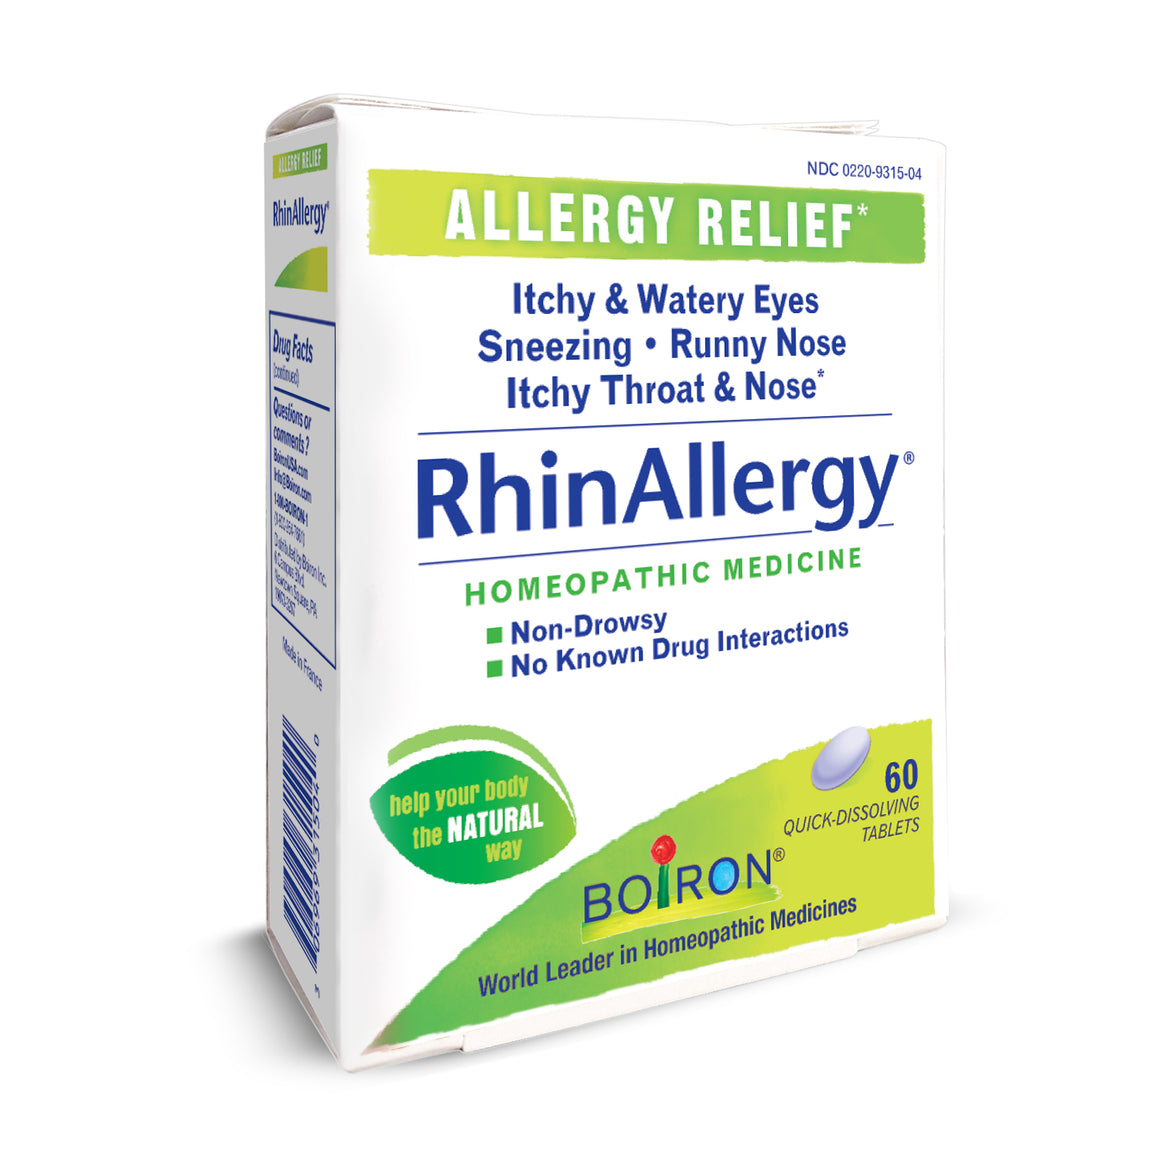 RhinAllergy® Tablets - Boiron - 60 quick-dissolving tablets